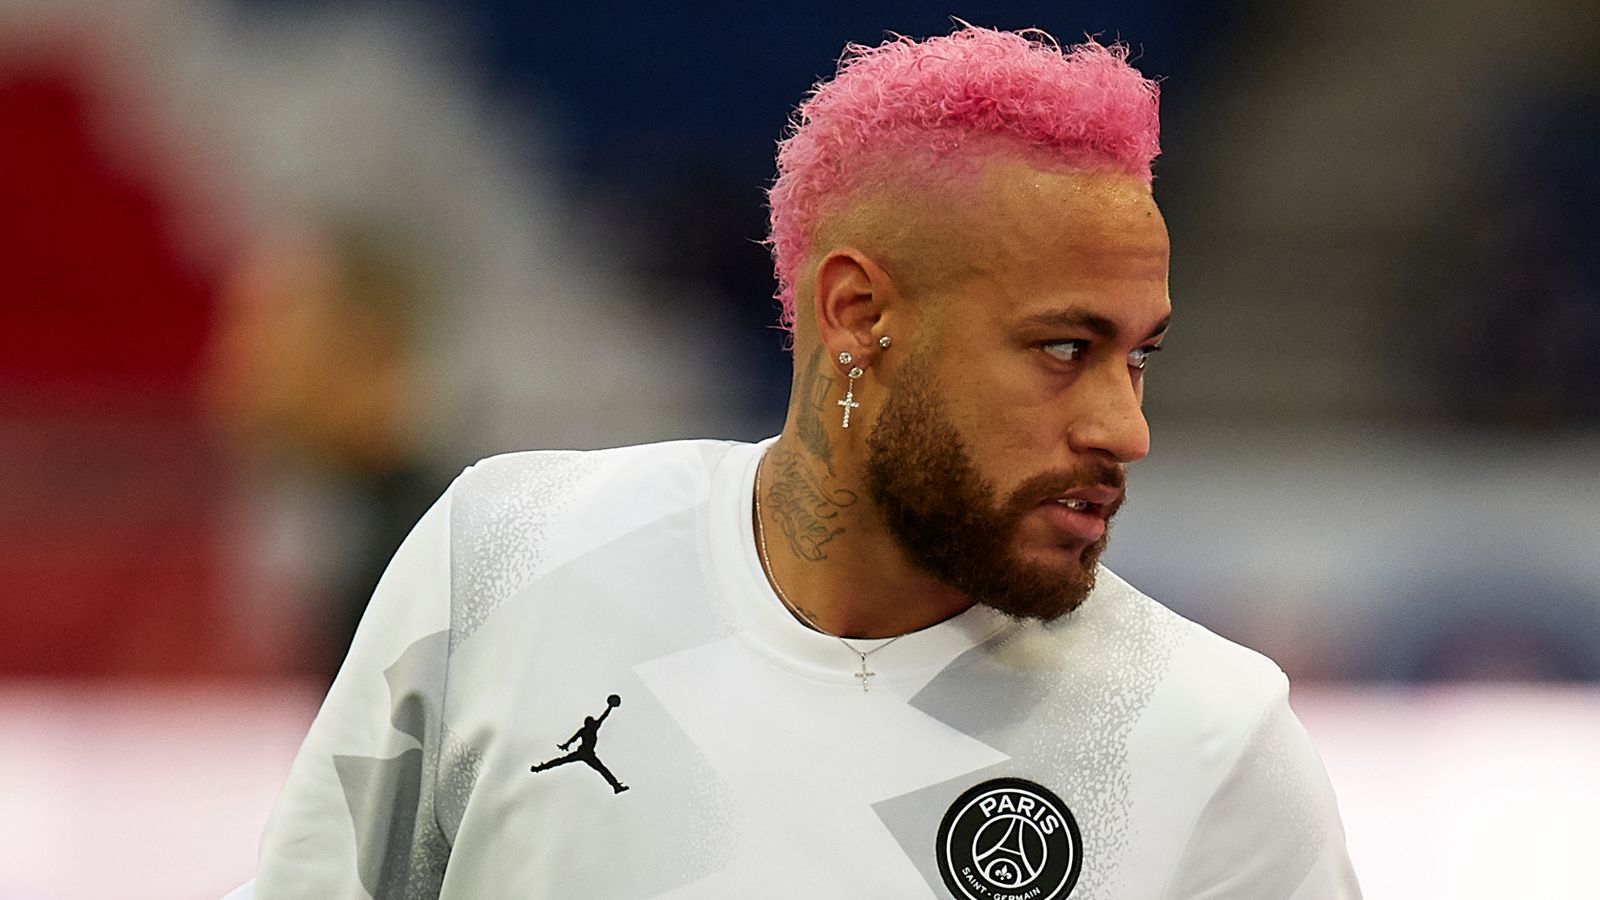 Neymar expected to play for PSG against Borussia Dortmund after